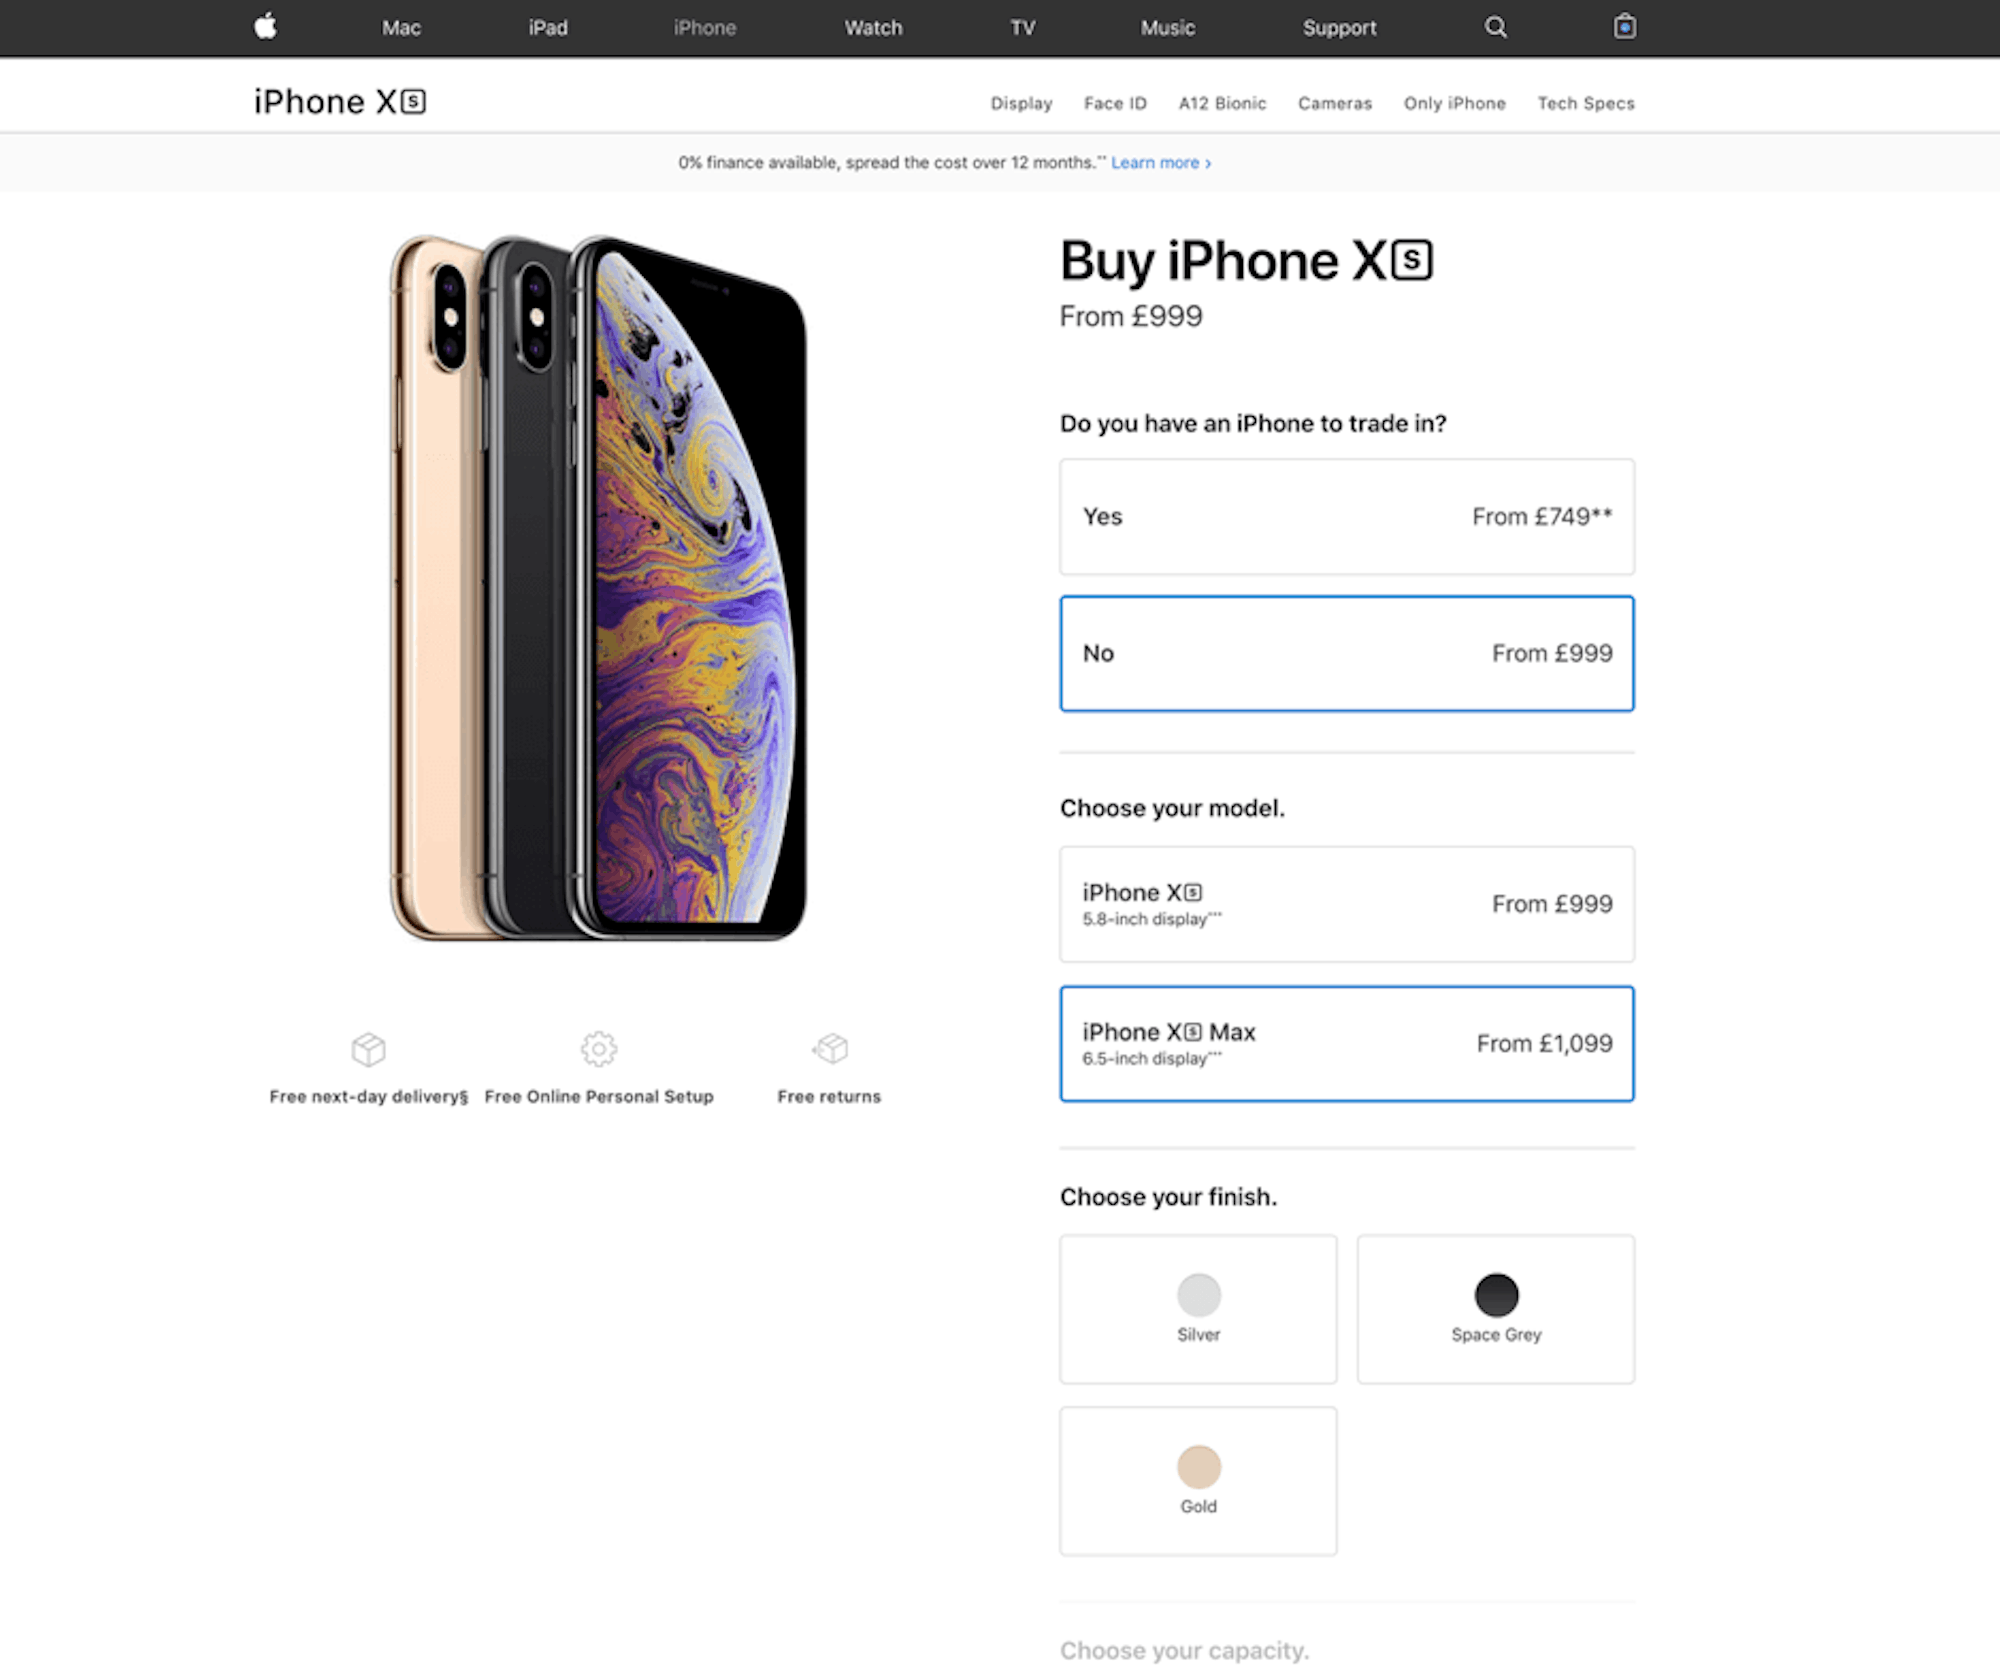 Apple's iPhone product pages